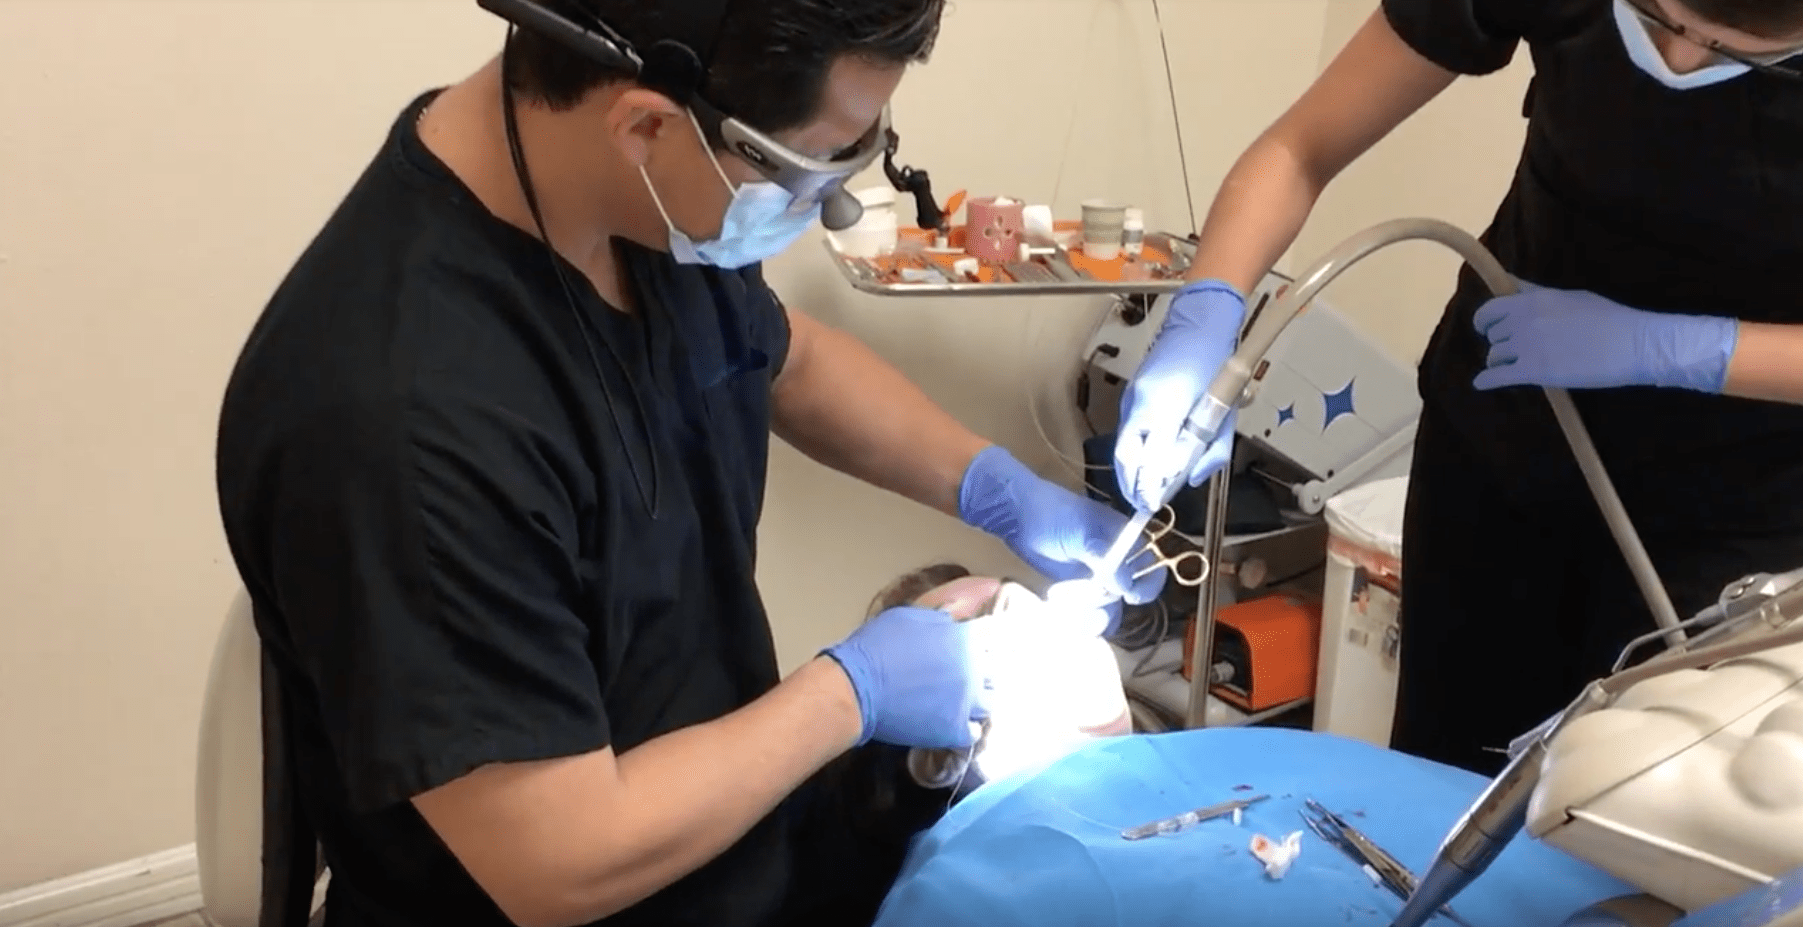 Finding an Affordable Dentist Near Me | Beyond Borders